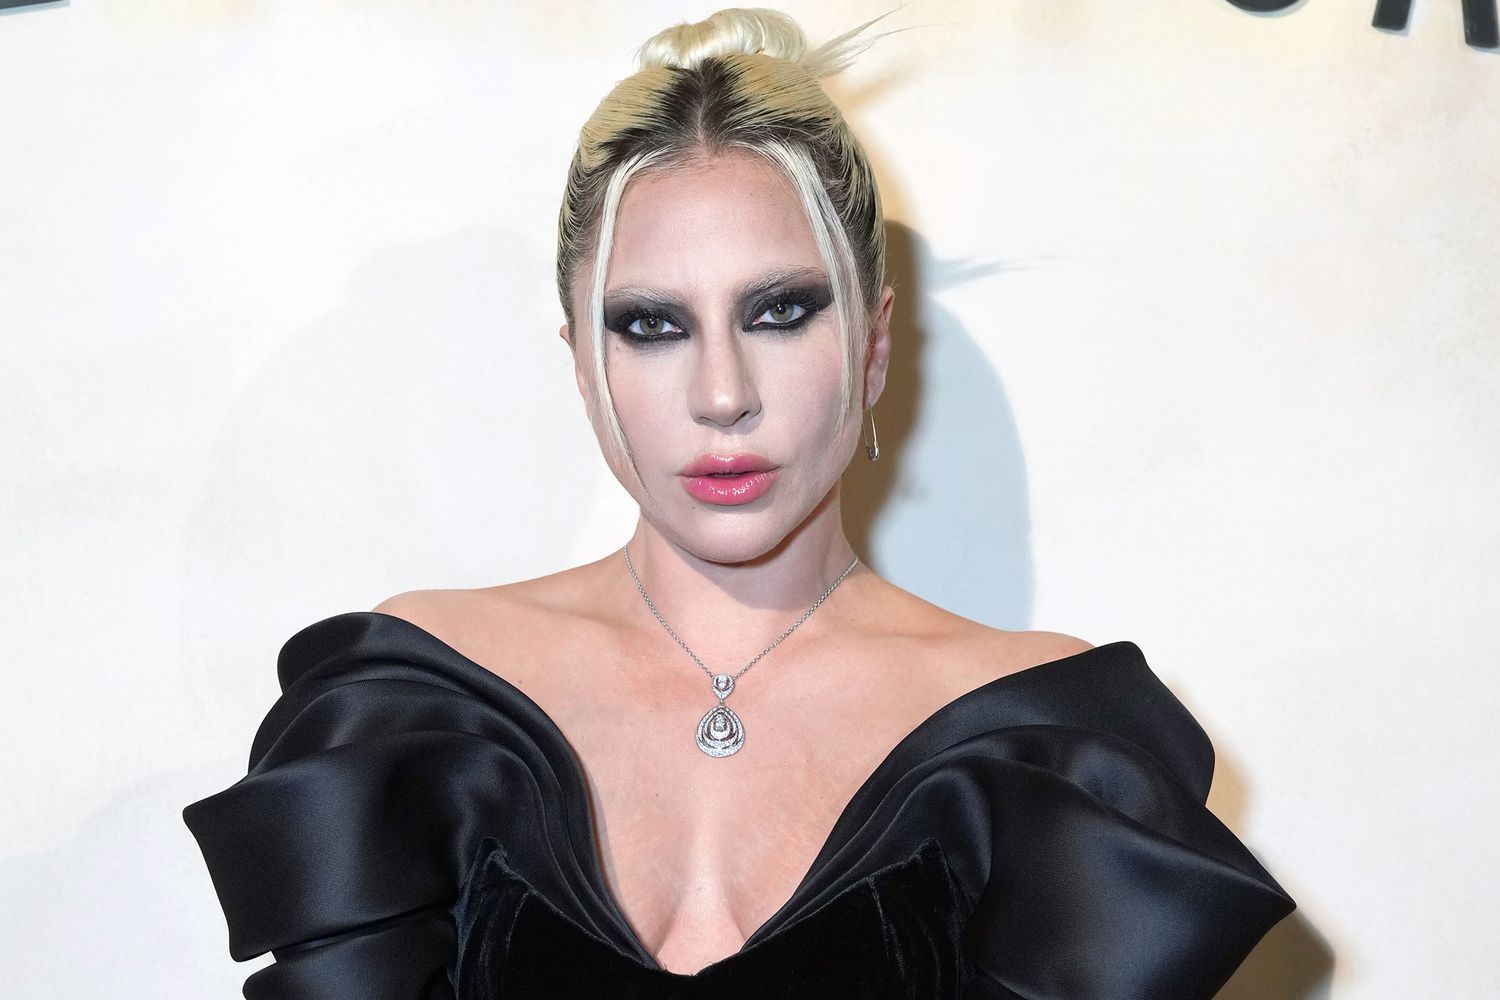 Judge rules Lady Gaga officially won't have to pay $500k reward to woman tied to dognapping